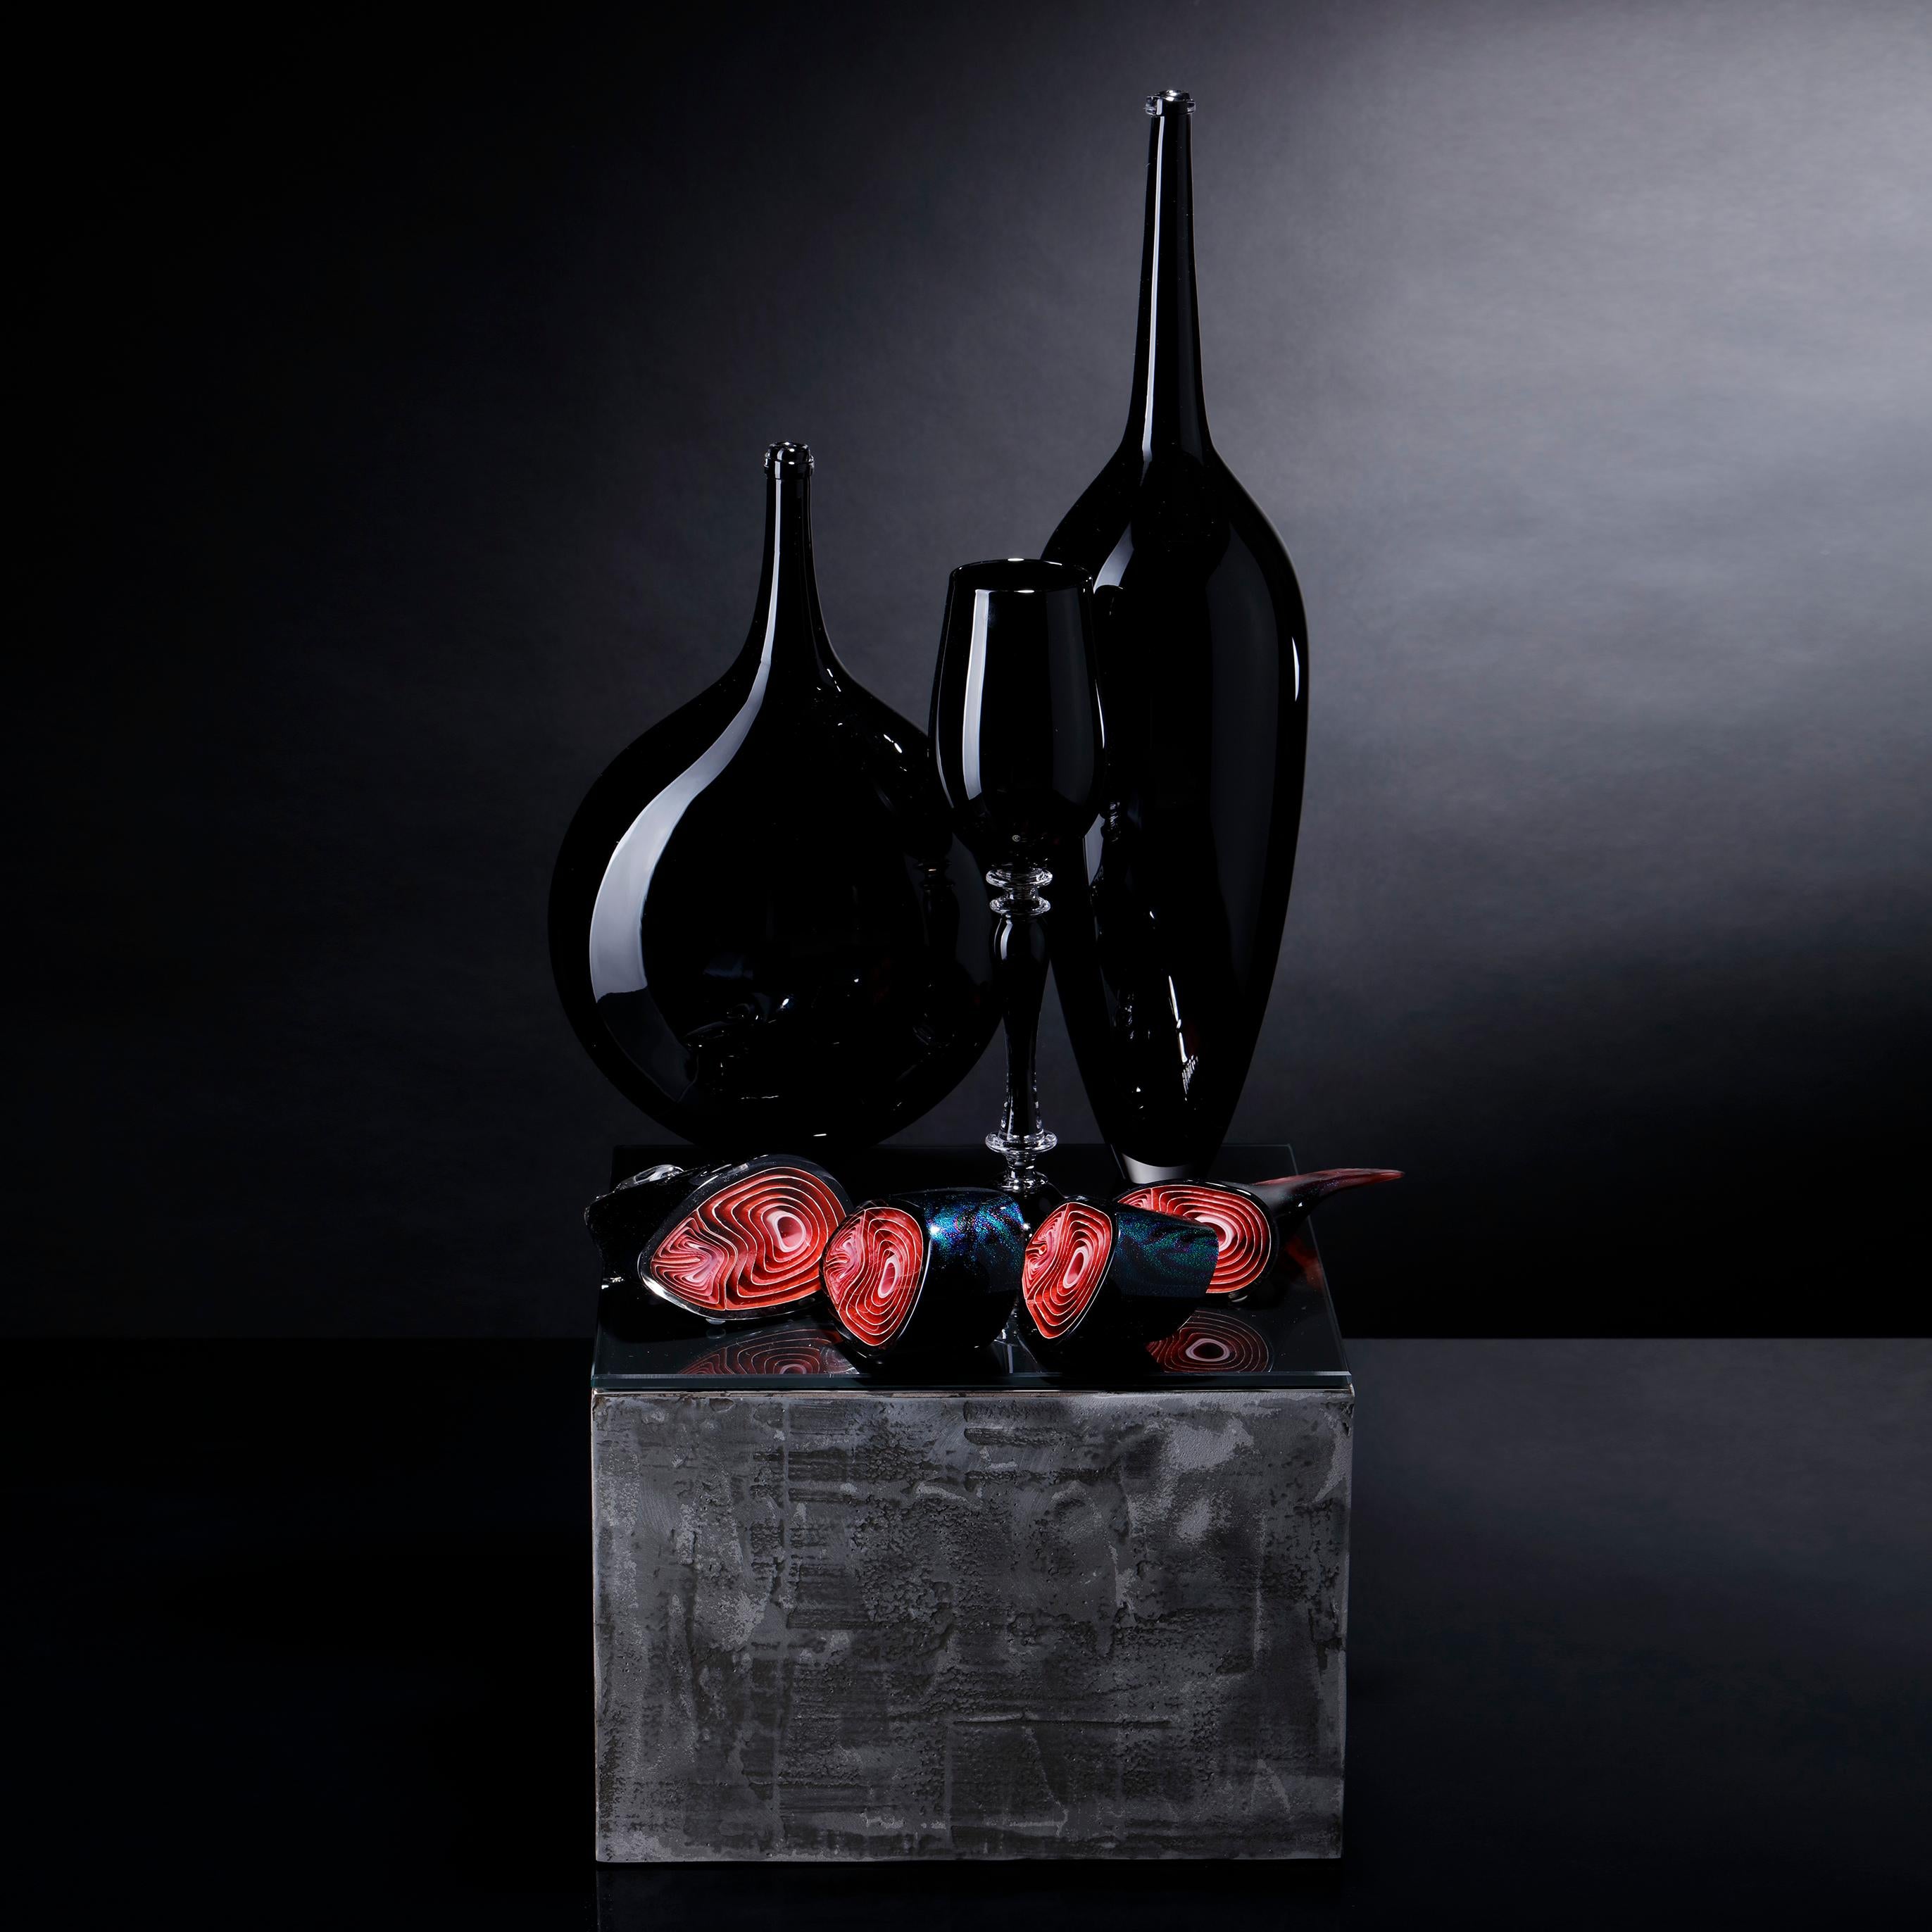 Organic Modern Still Life with Fish, a Black and Red Glass Still Life Art Work by Elliot Walker